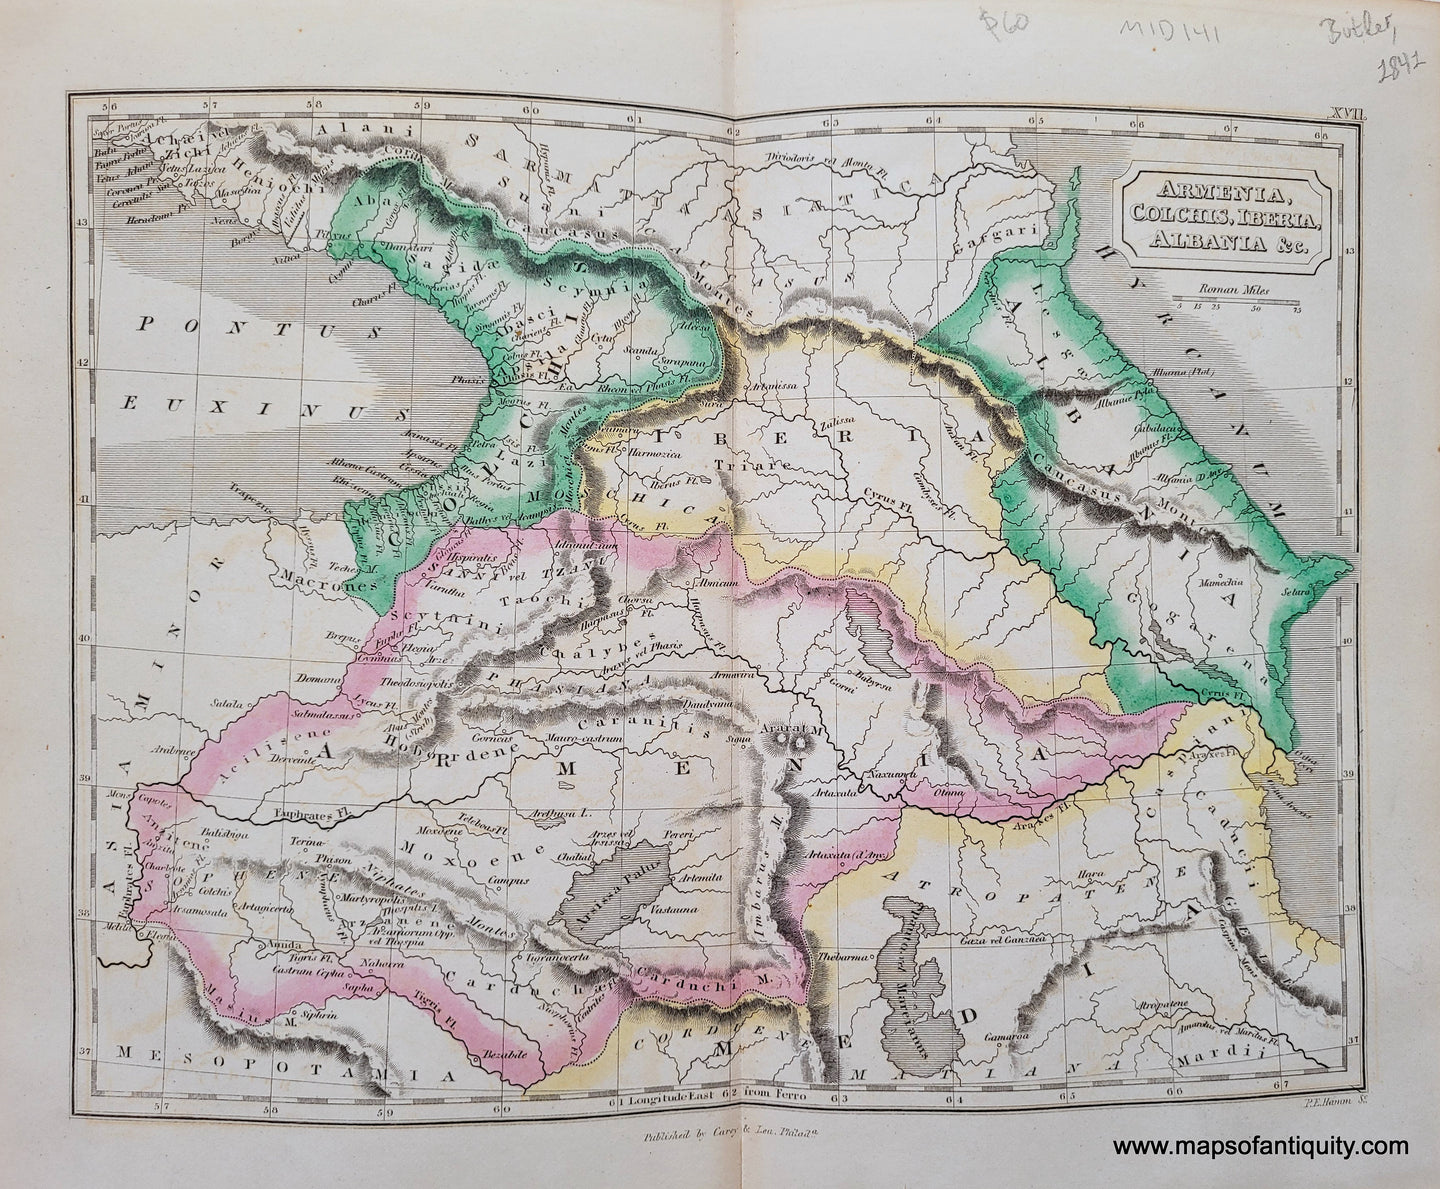 Antique-Hand-Colored-Map-Armenia-Colchis-Iberia-Albania-&c.-**********-Ancient-World-Middle-East-&-Holy-Land--1841-Butler-Maps-Of-Antiquity